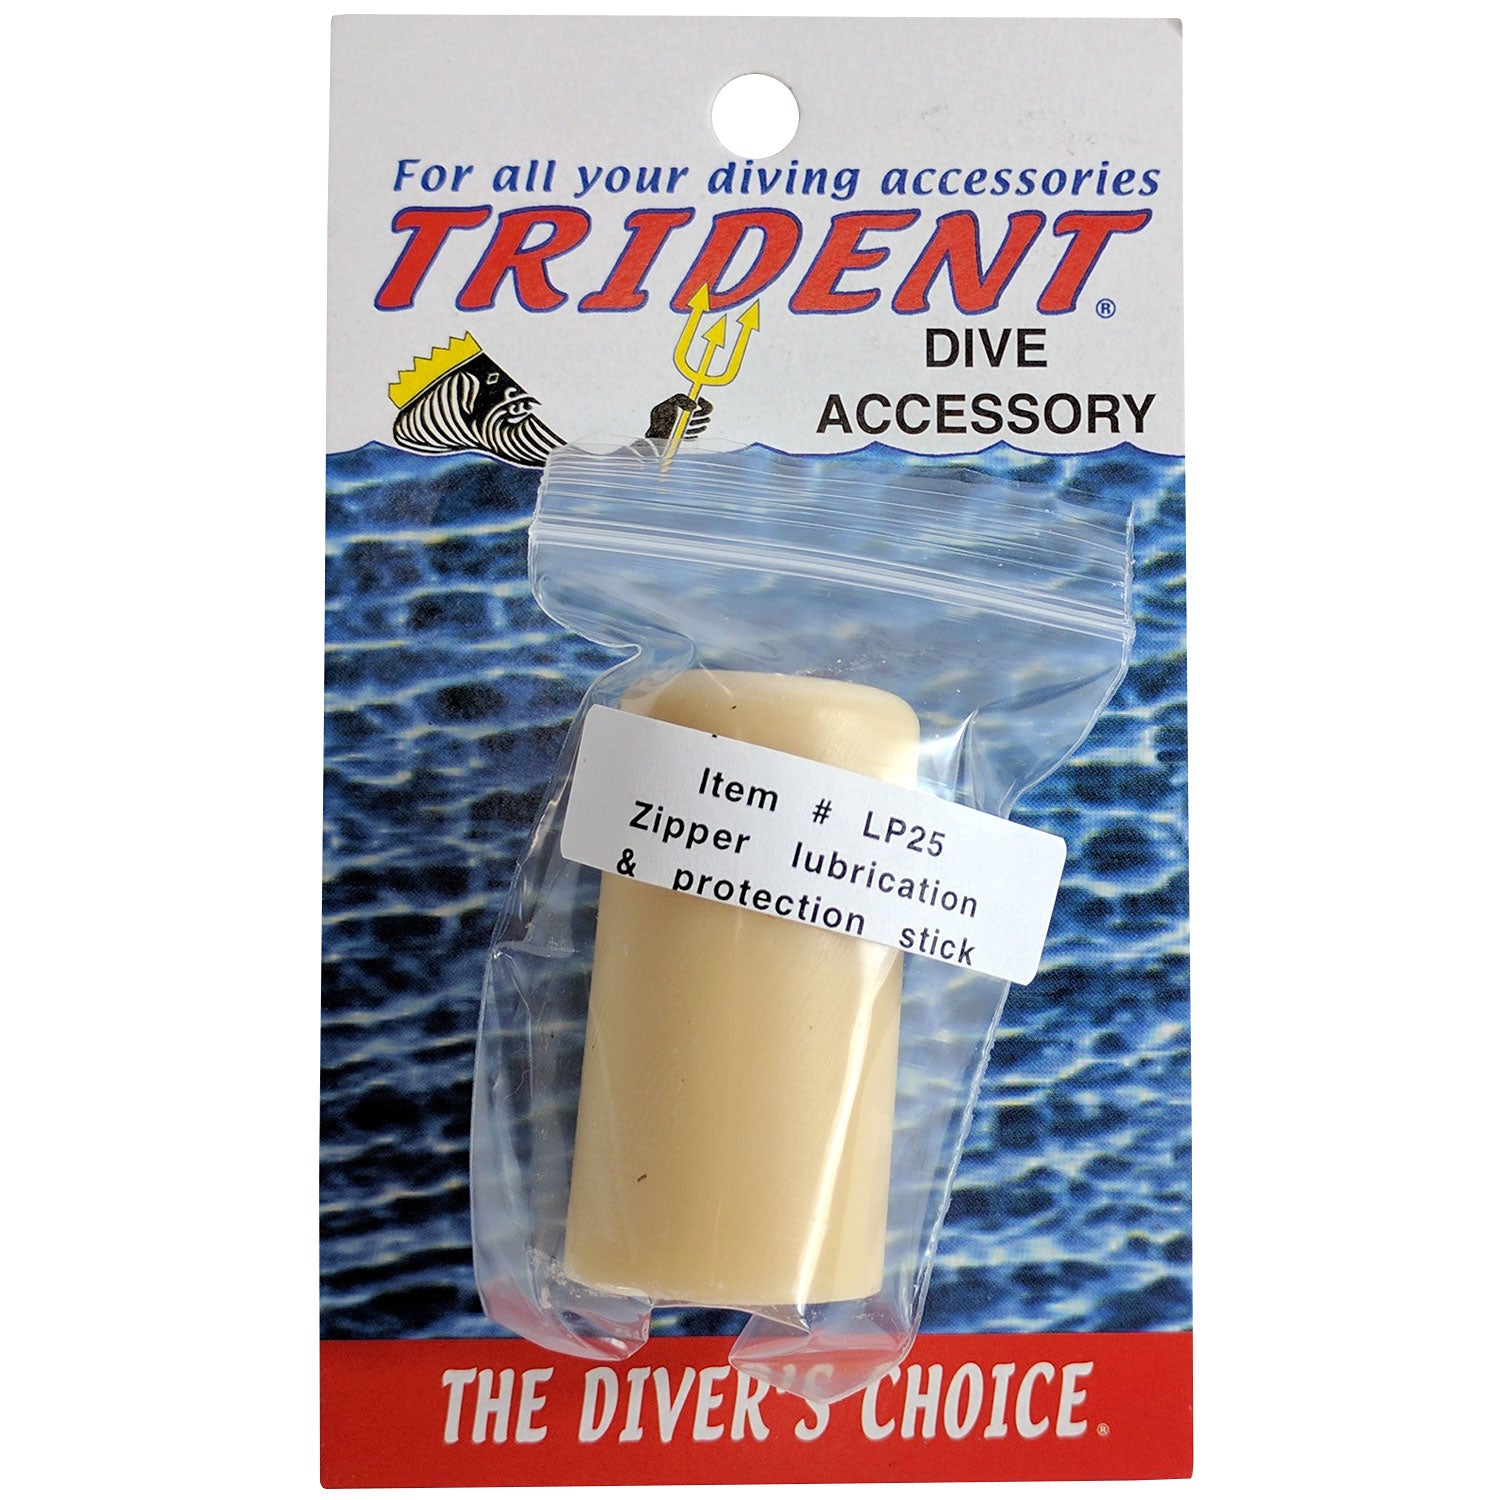 Trident Zipper Lubrication and Protection Stick